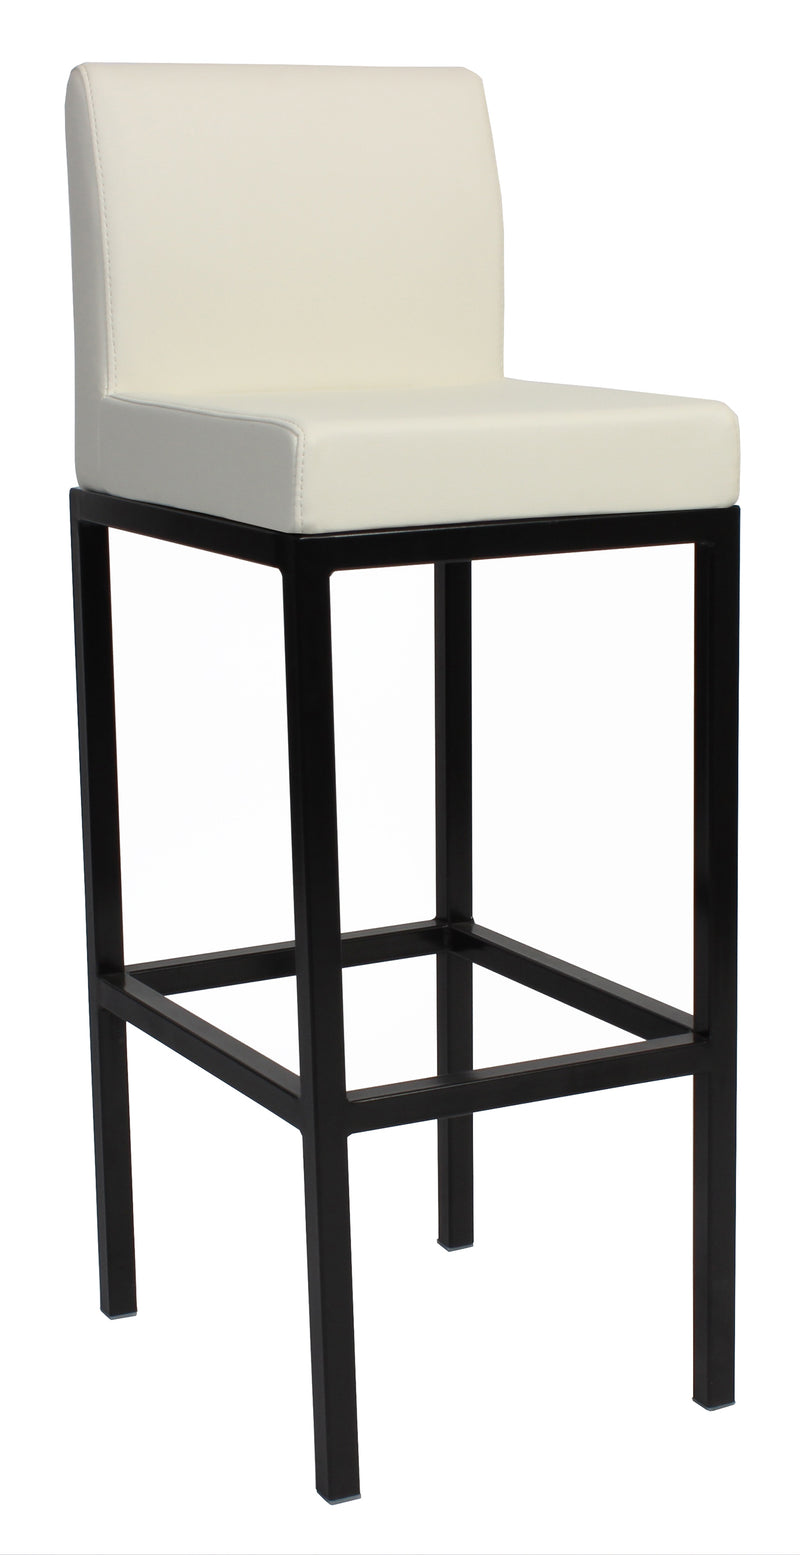 2x York Stools, Stools - Sketch Commercial Hospitality Furniture